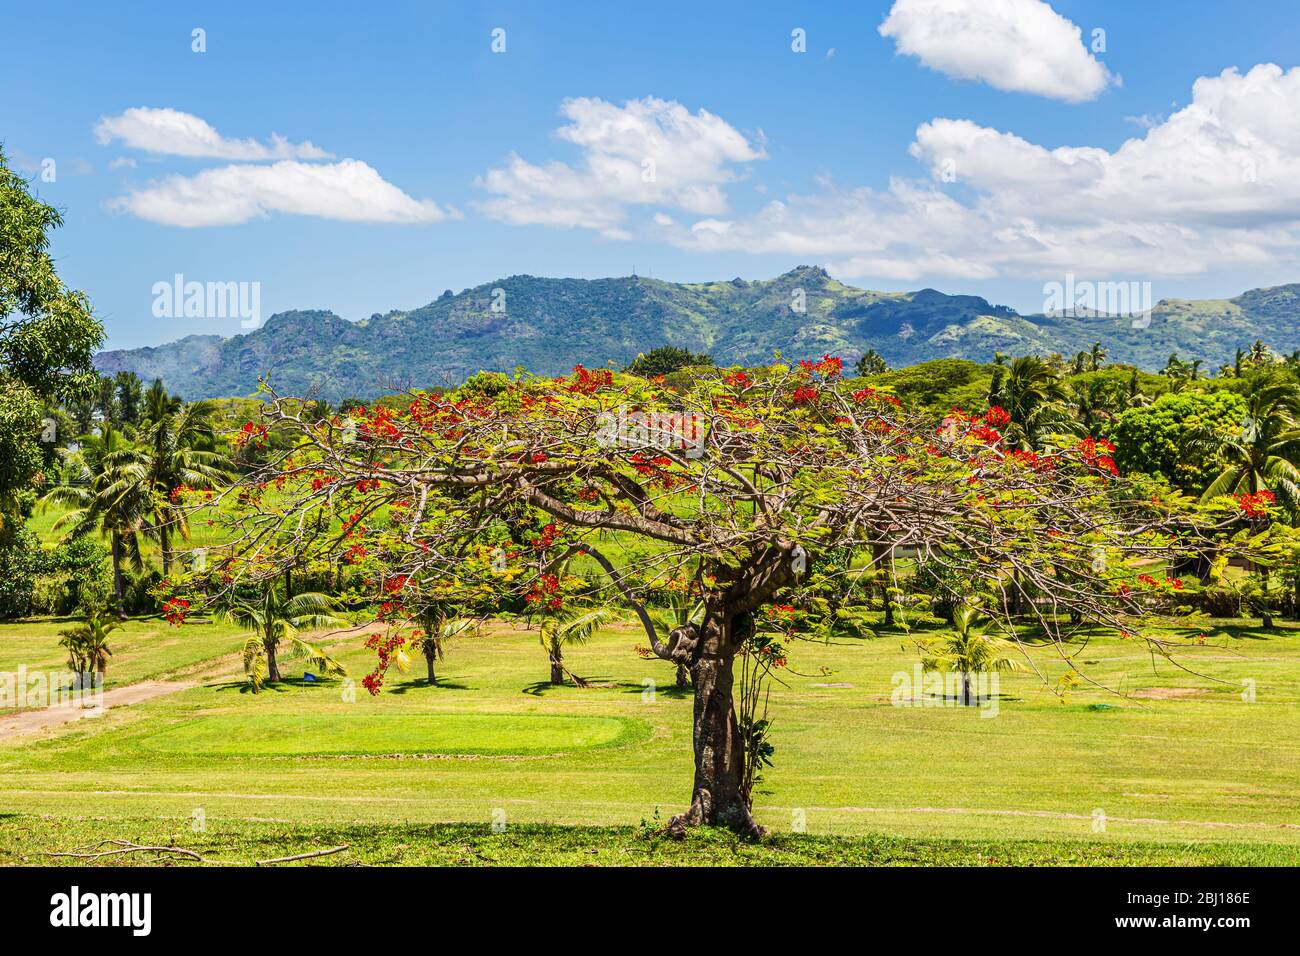 Delonix regia tree, a species of flowering plant in the bean family Fabaceae, subfamily Caesalpinioideae; with the  Sleeping Giant mountain in the bac Stock Photo